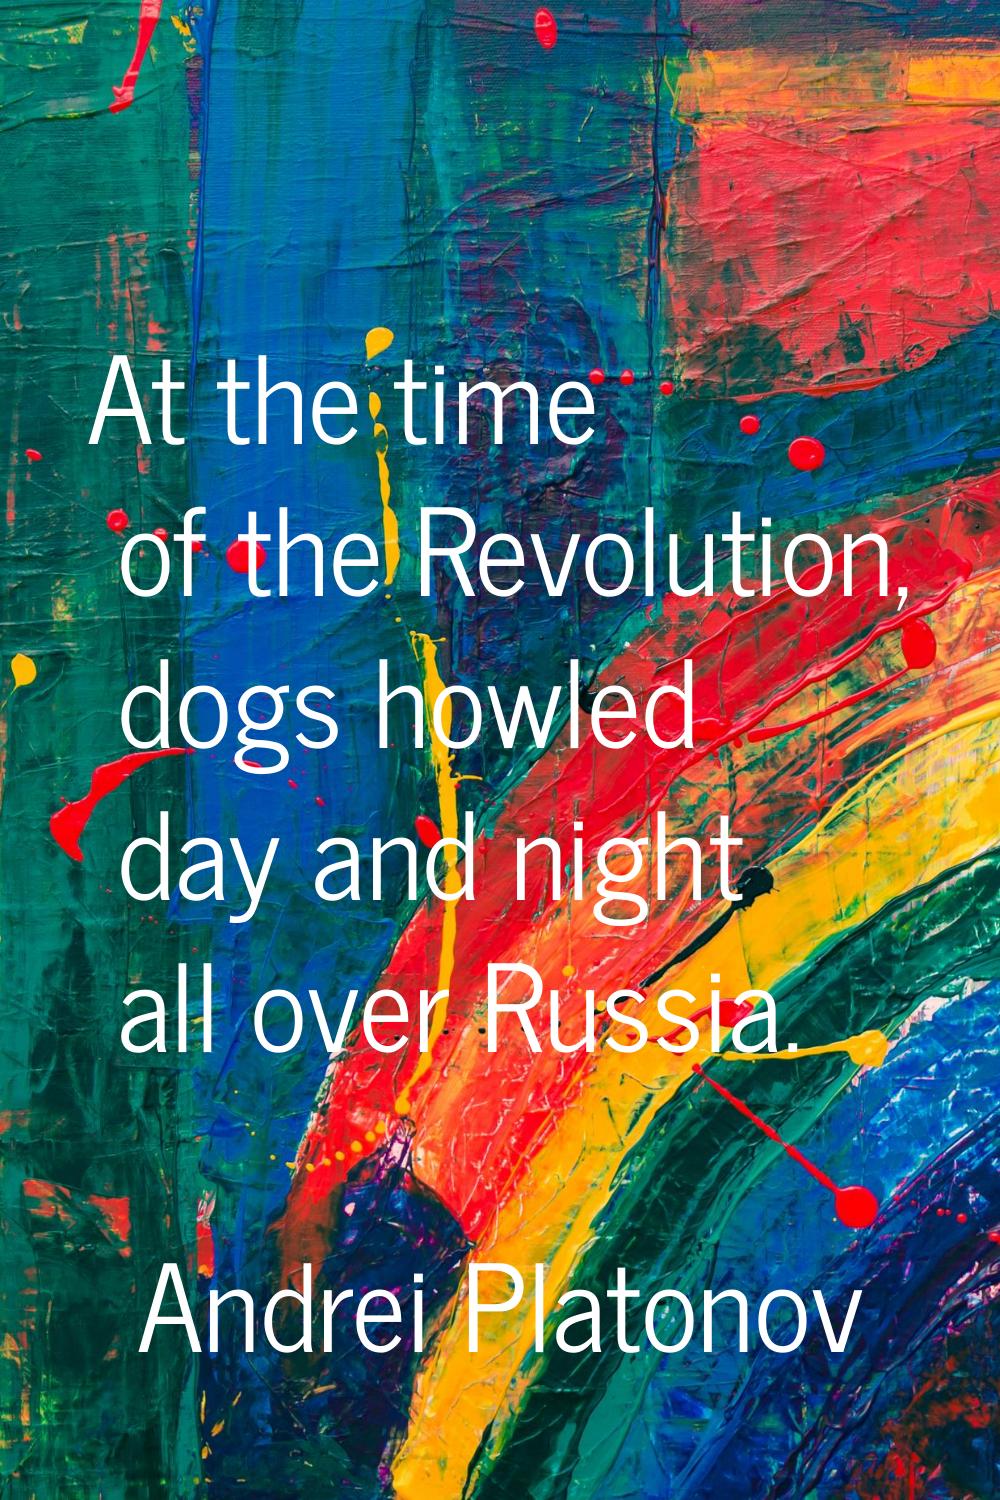 At the time of the Revolution, dogs howled day and night all over Russia.